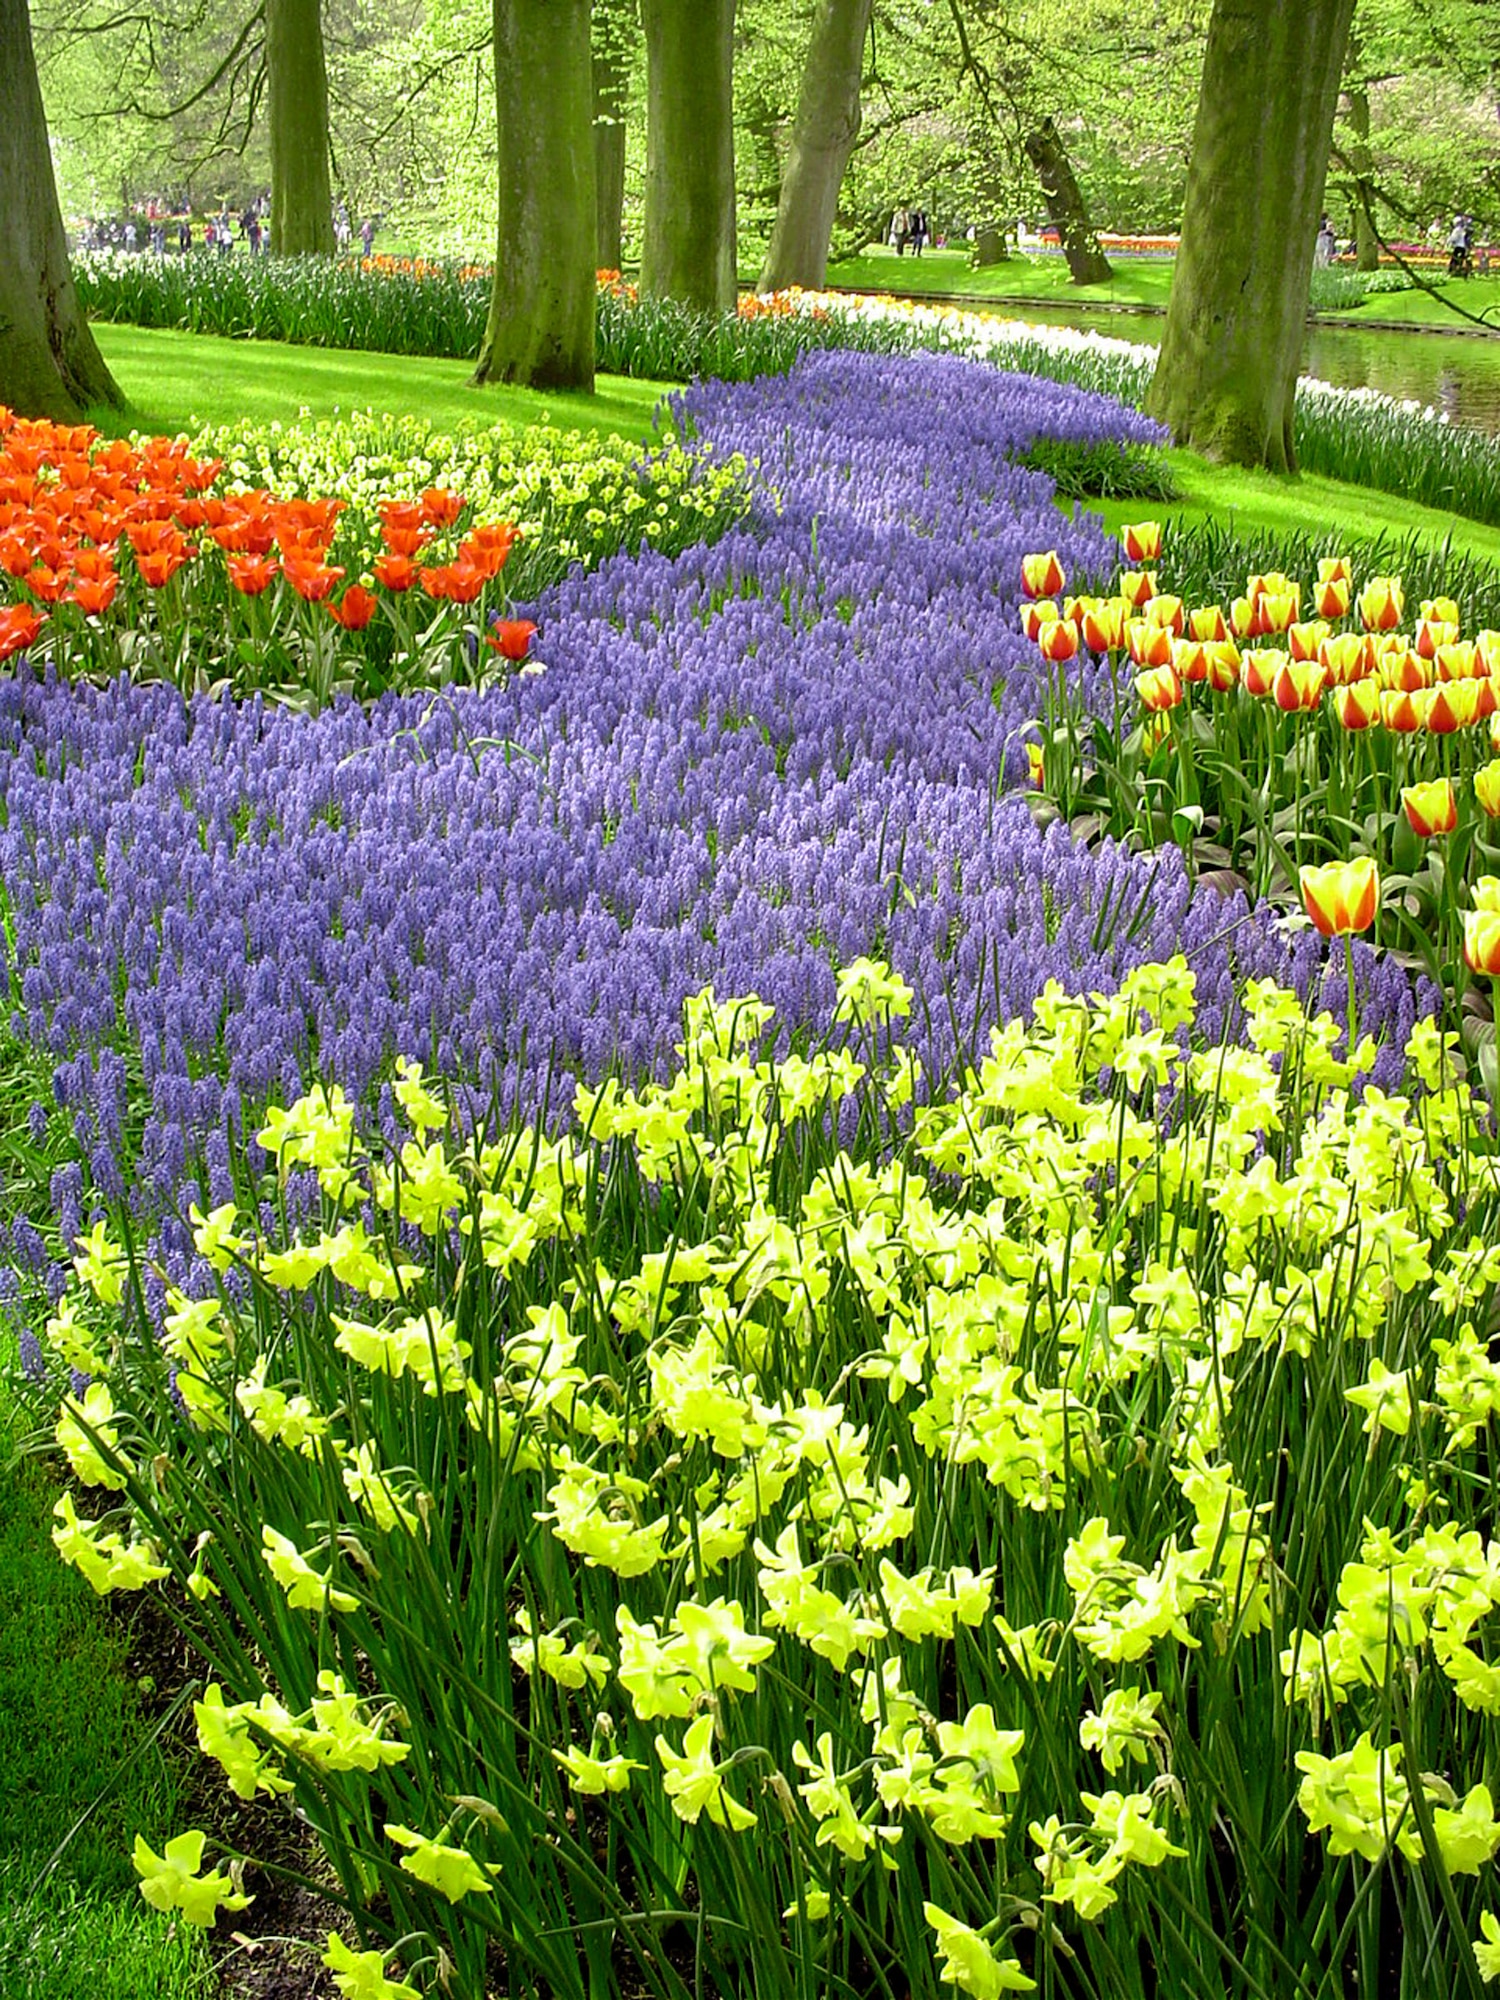 KEUKENHOF, Holland - The park has many different kinds of flowers and theme gardens where flower bulbs play the lead role -- Abstract, Scent, Color, Renaissance, Style, Border and Rockery-Shadow-Water. Every year a number of artists are selected to exhibit some 30 sculptures and other objects of art throughout the park. There are restaurants, sunny terraces and coffee shops available at the Keukenhof, as well as a huge parking lot. Keukenhof has a grand display of 500 different varieties of tulips, daffodils, hyacinths and other bulbs can be seen. An area of 7,000 square meters of greenhouses as a permanent and unique flower show, and a huge indoor spring garden staged throughout the duration of the exhibition are available. (Courtesy photo)